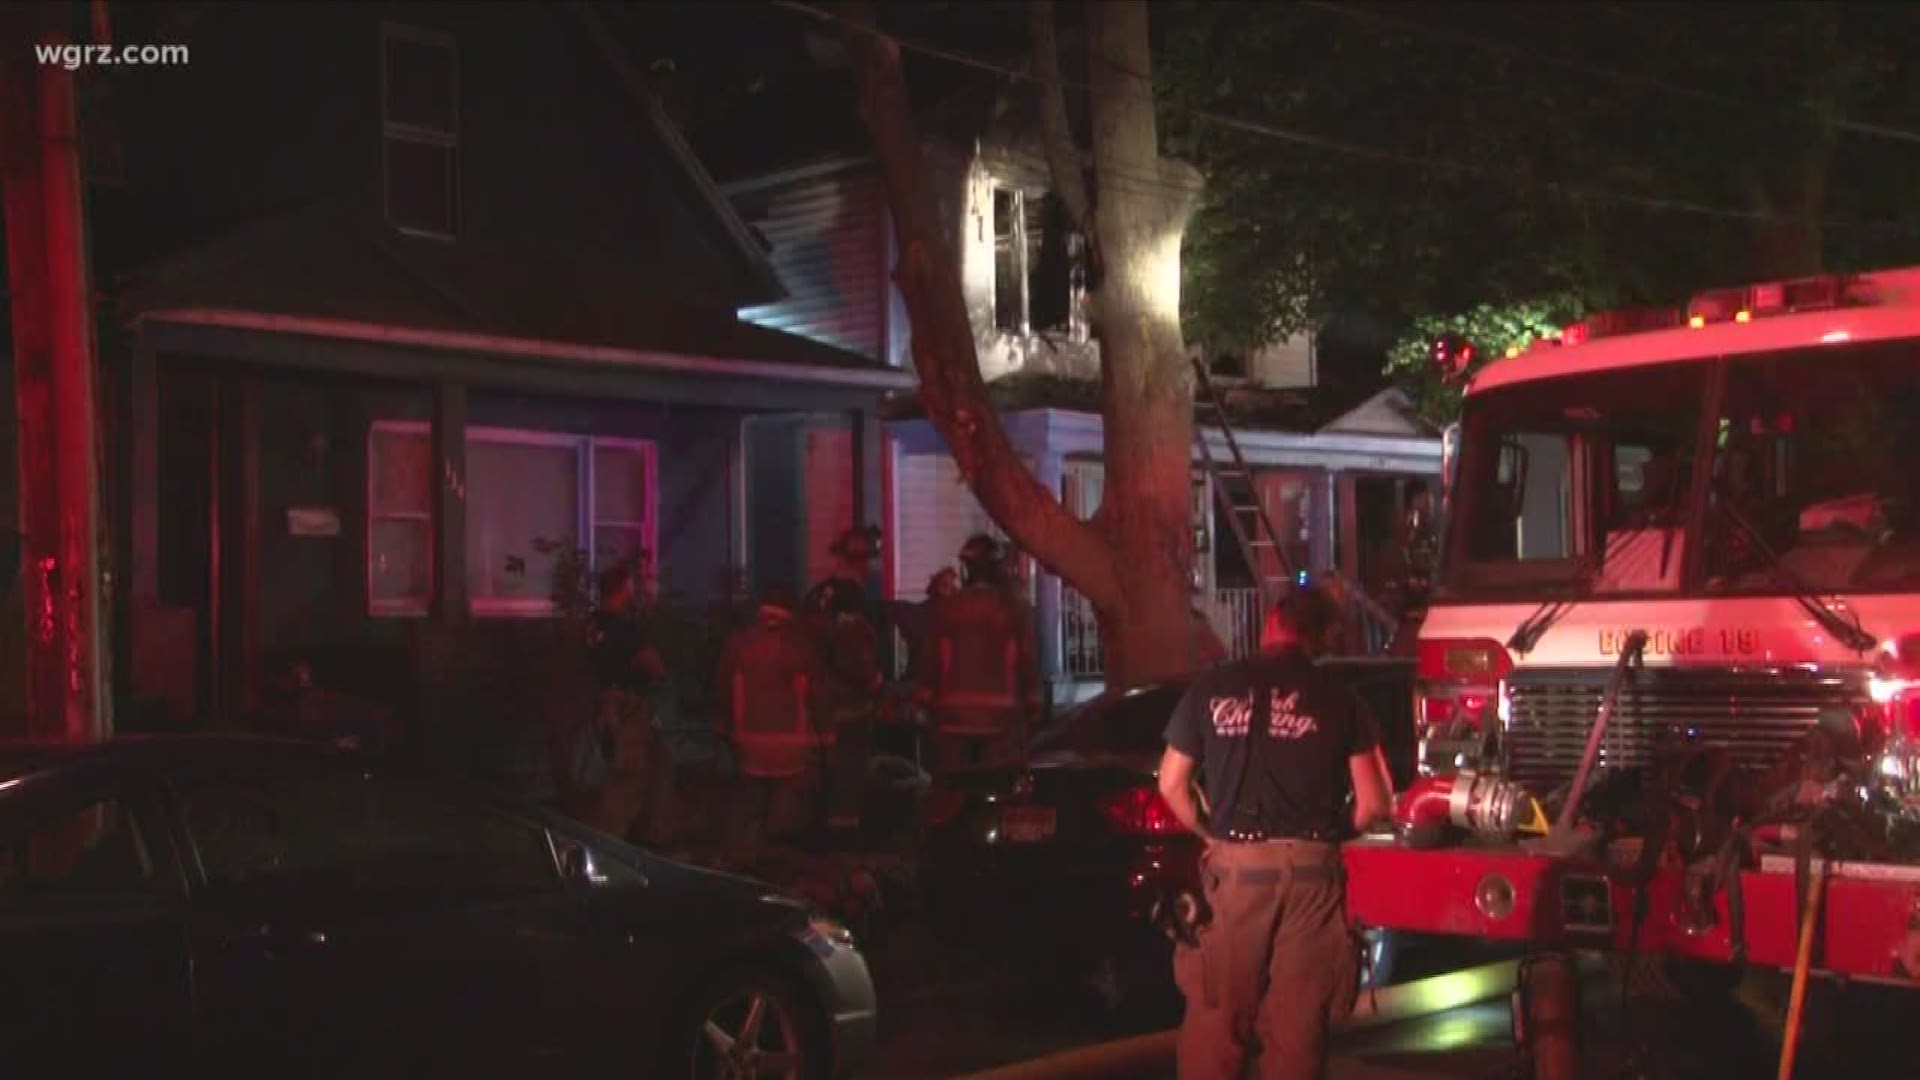 The fire broke out in home on Gelston Street late Sunday night.